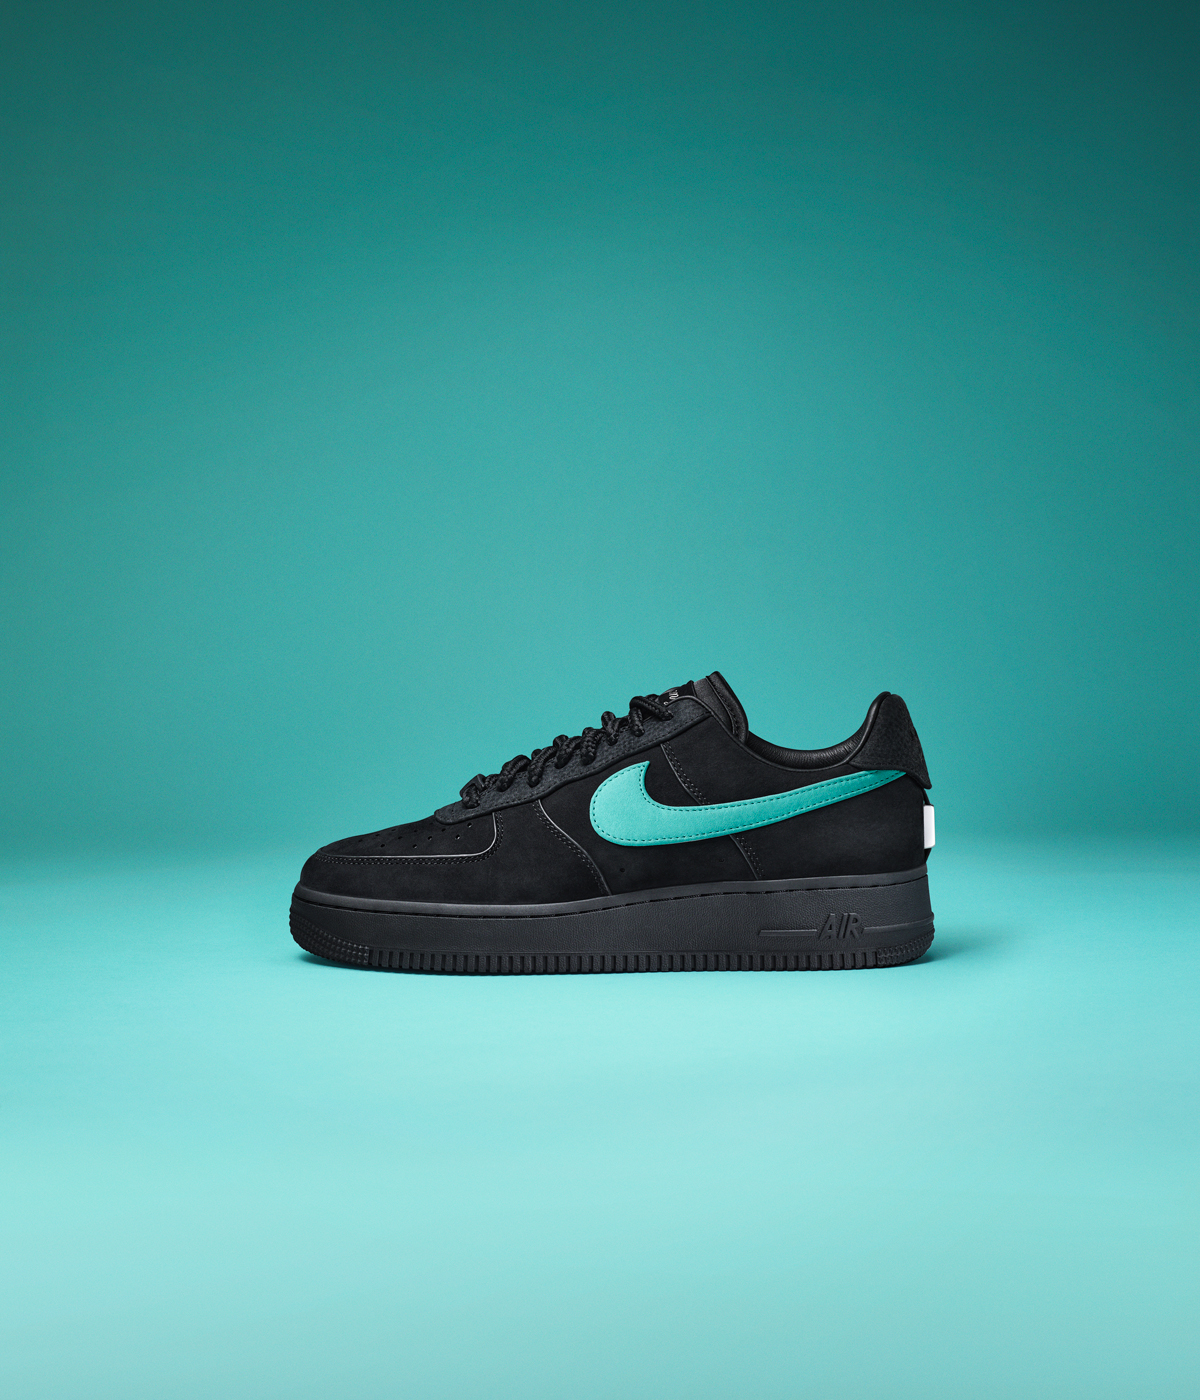 Nike x Tiffany & Co Air Force 1 1837 and silverware | Wallpaper